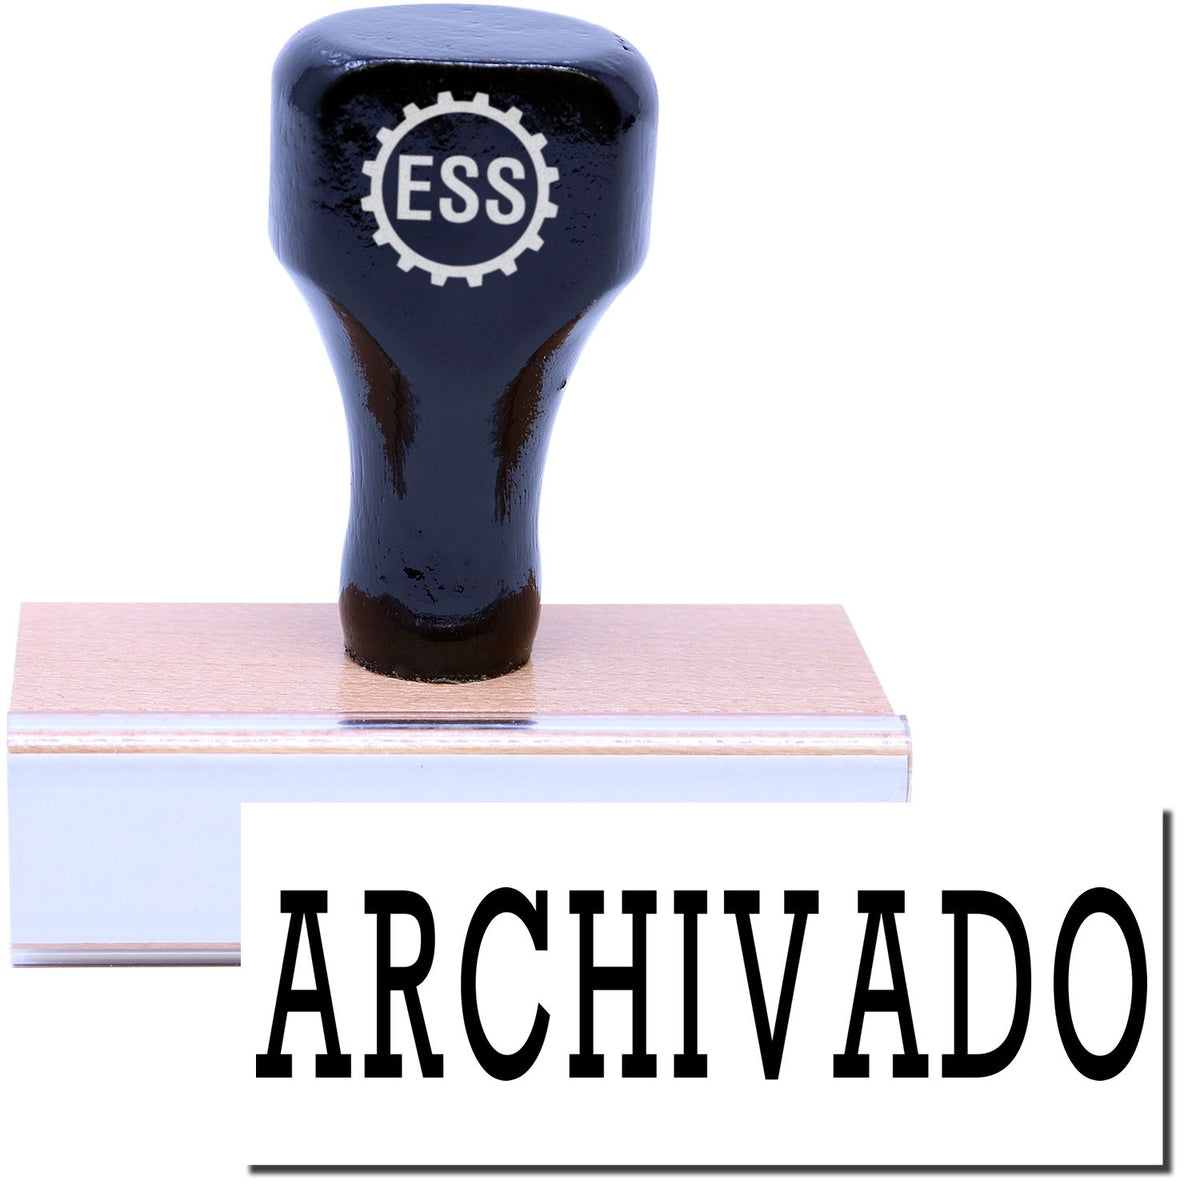 A stock office rubber stamp with a stamped image showing how the text &quot;ARCHIVADO&quot; is displayed after stamping.